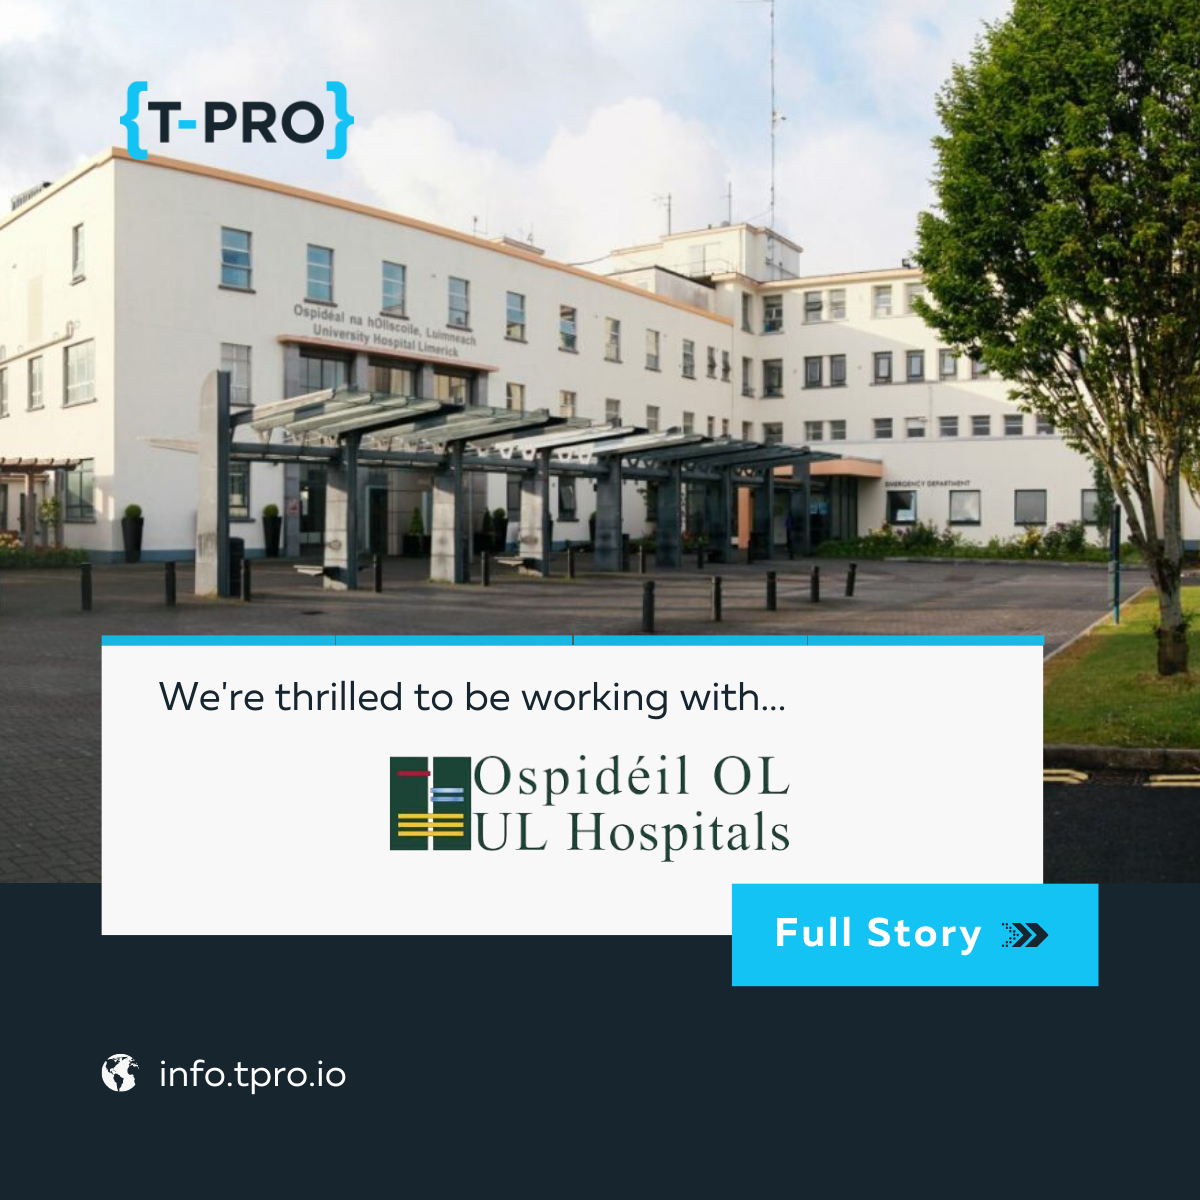 T-Pro welcomes the UL Hospitals Group